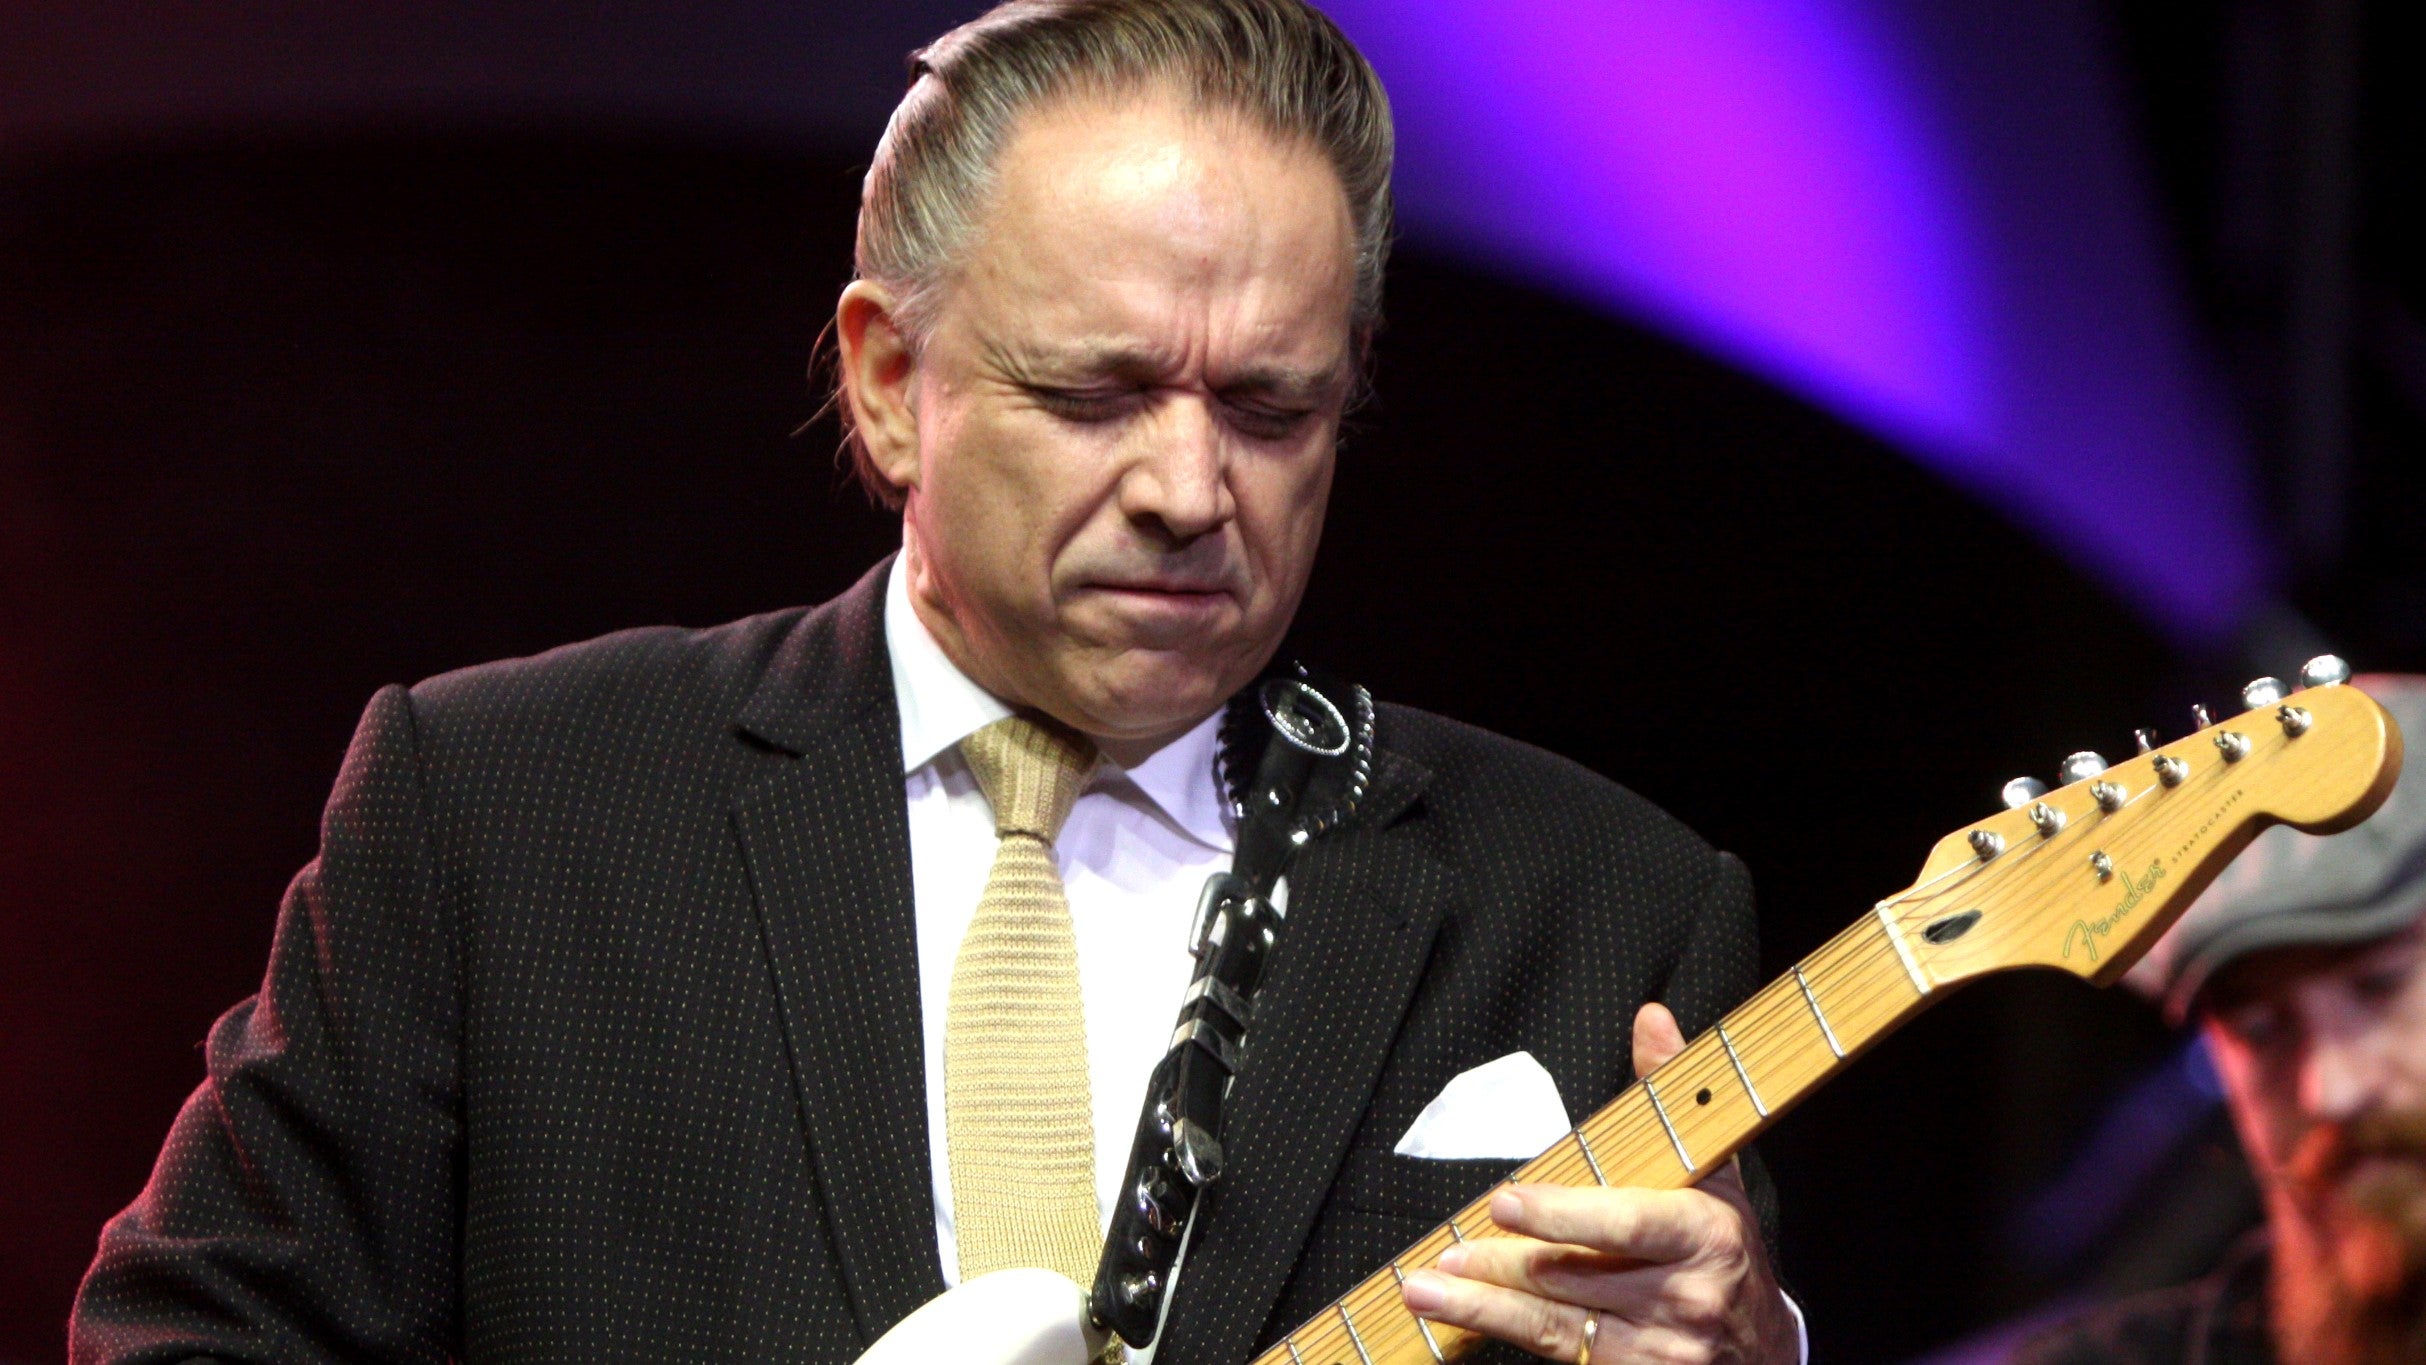 Jimmie Vaughan at Plaza Live - Orlando